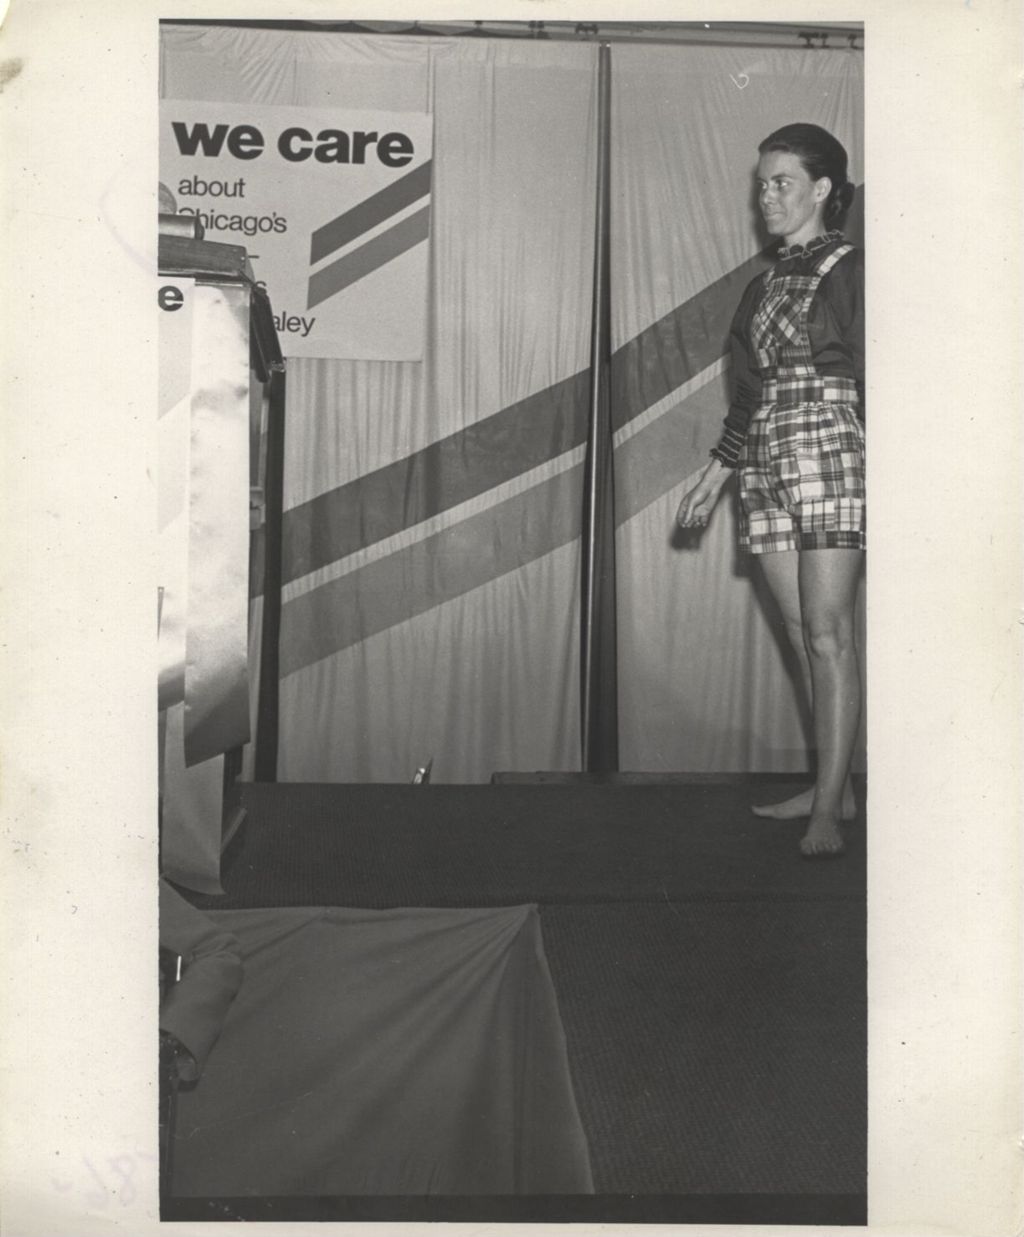 Miniature of Woman modeling an outfit at a "We Care" event